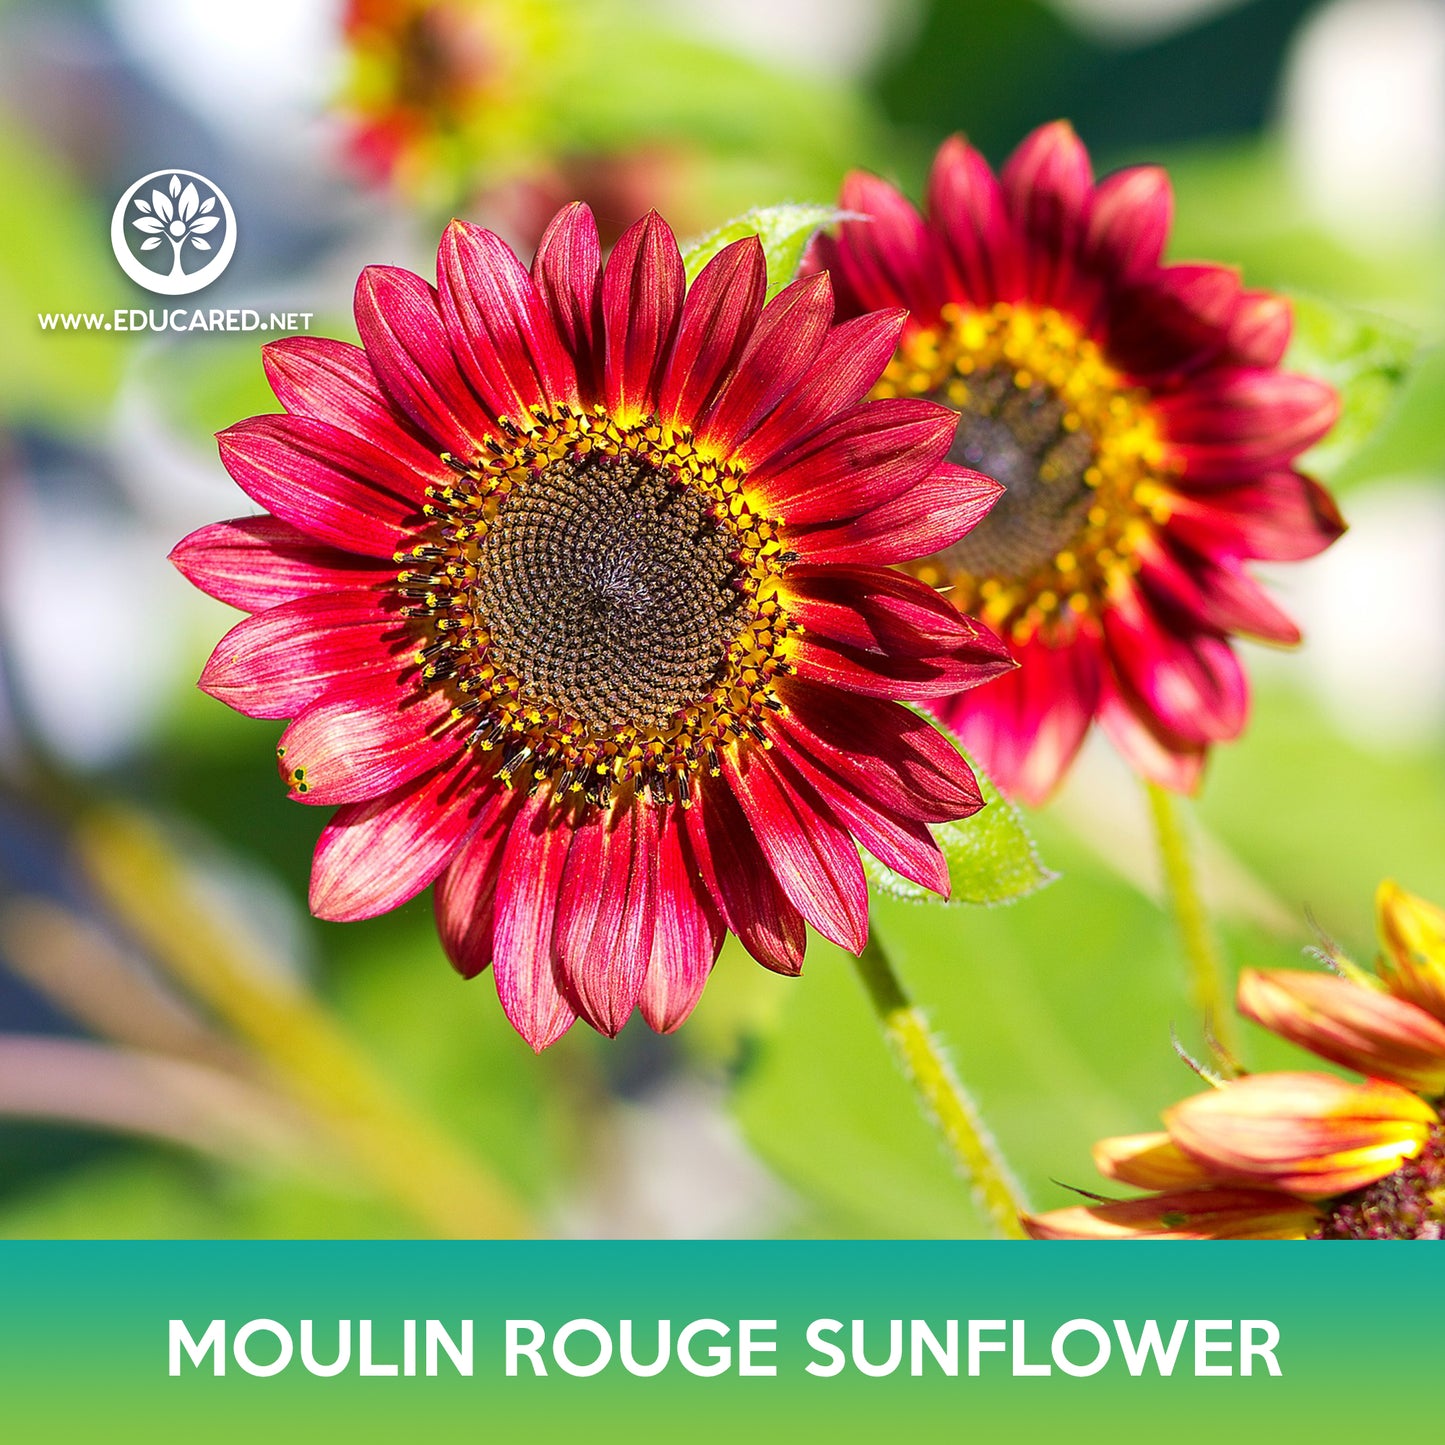 Moulin Rouge Sunflower Seed, Red Sunflower